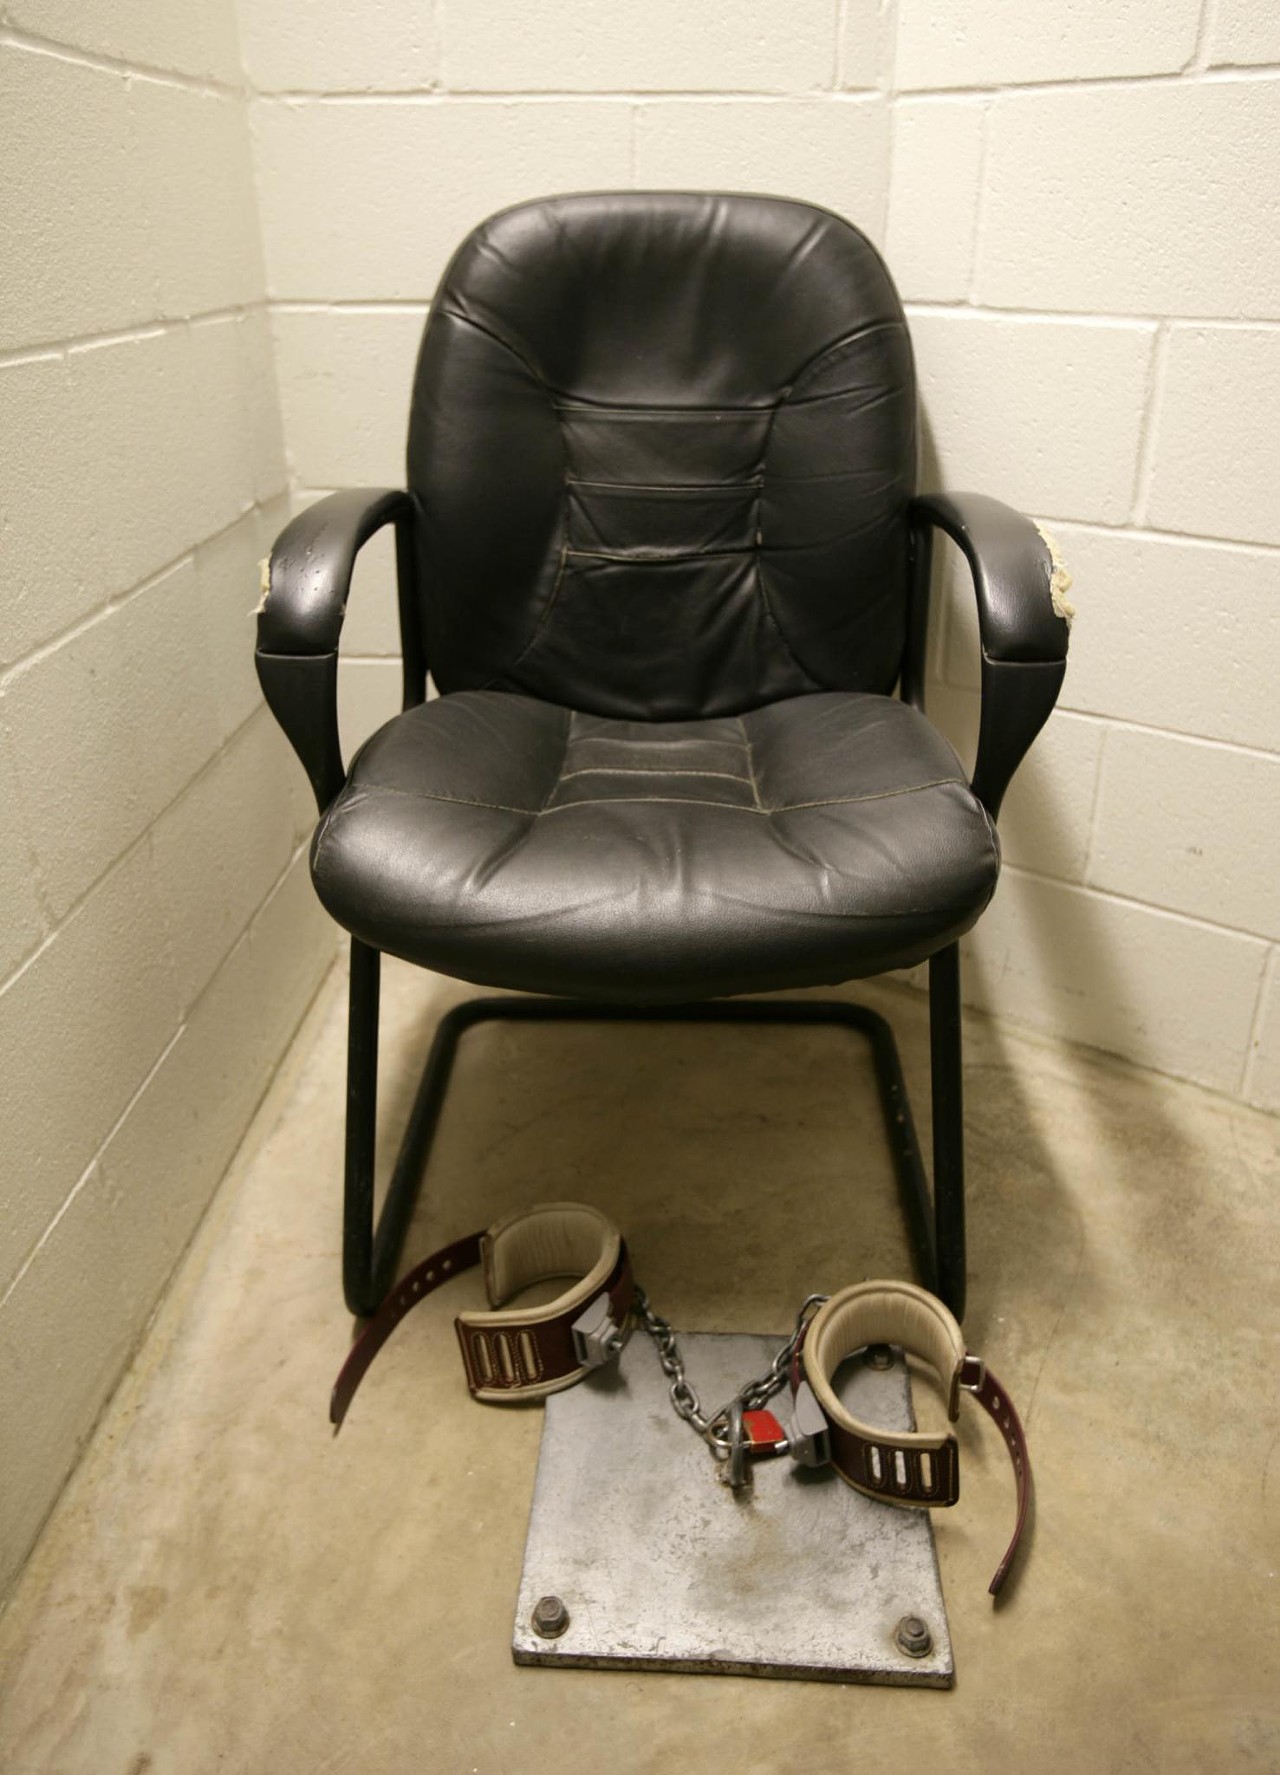 When their lawyers come to visit, detainees are shackled to this chair in a &ldquo;habeas room&rdquo; in Camp 5.